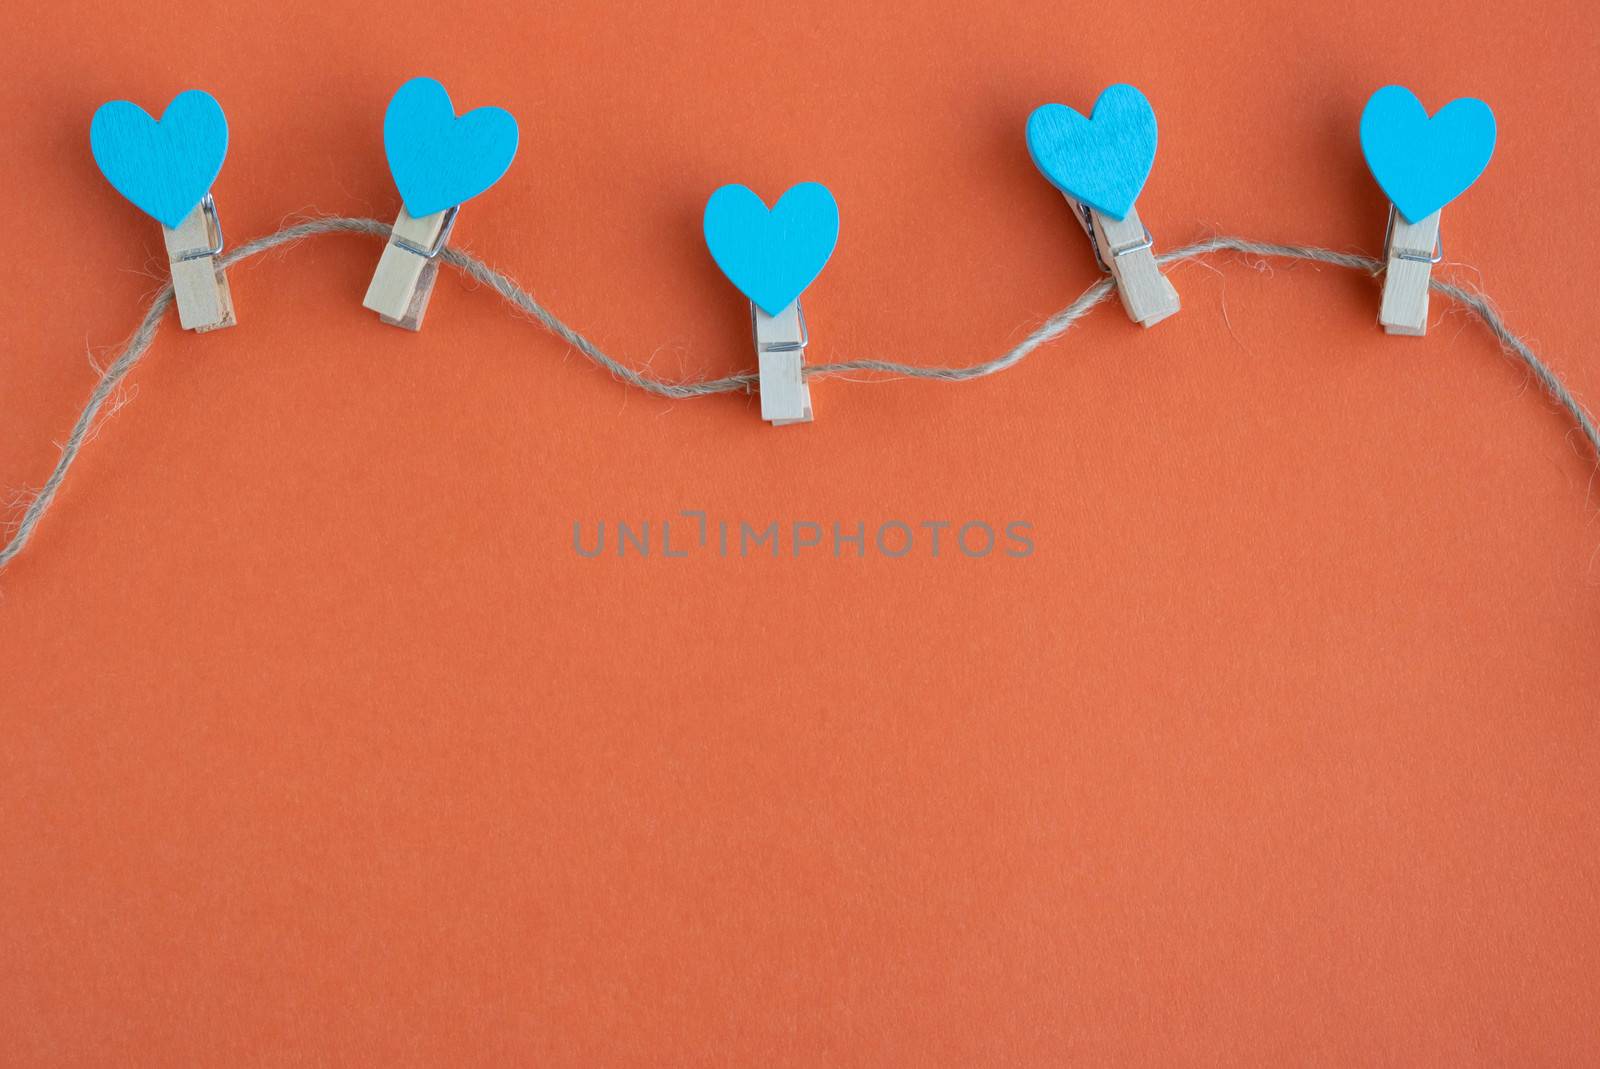 Small clothespins and blue hearts on a rope on an orange background